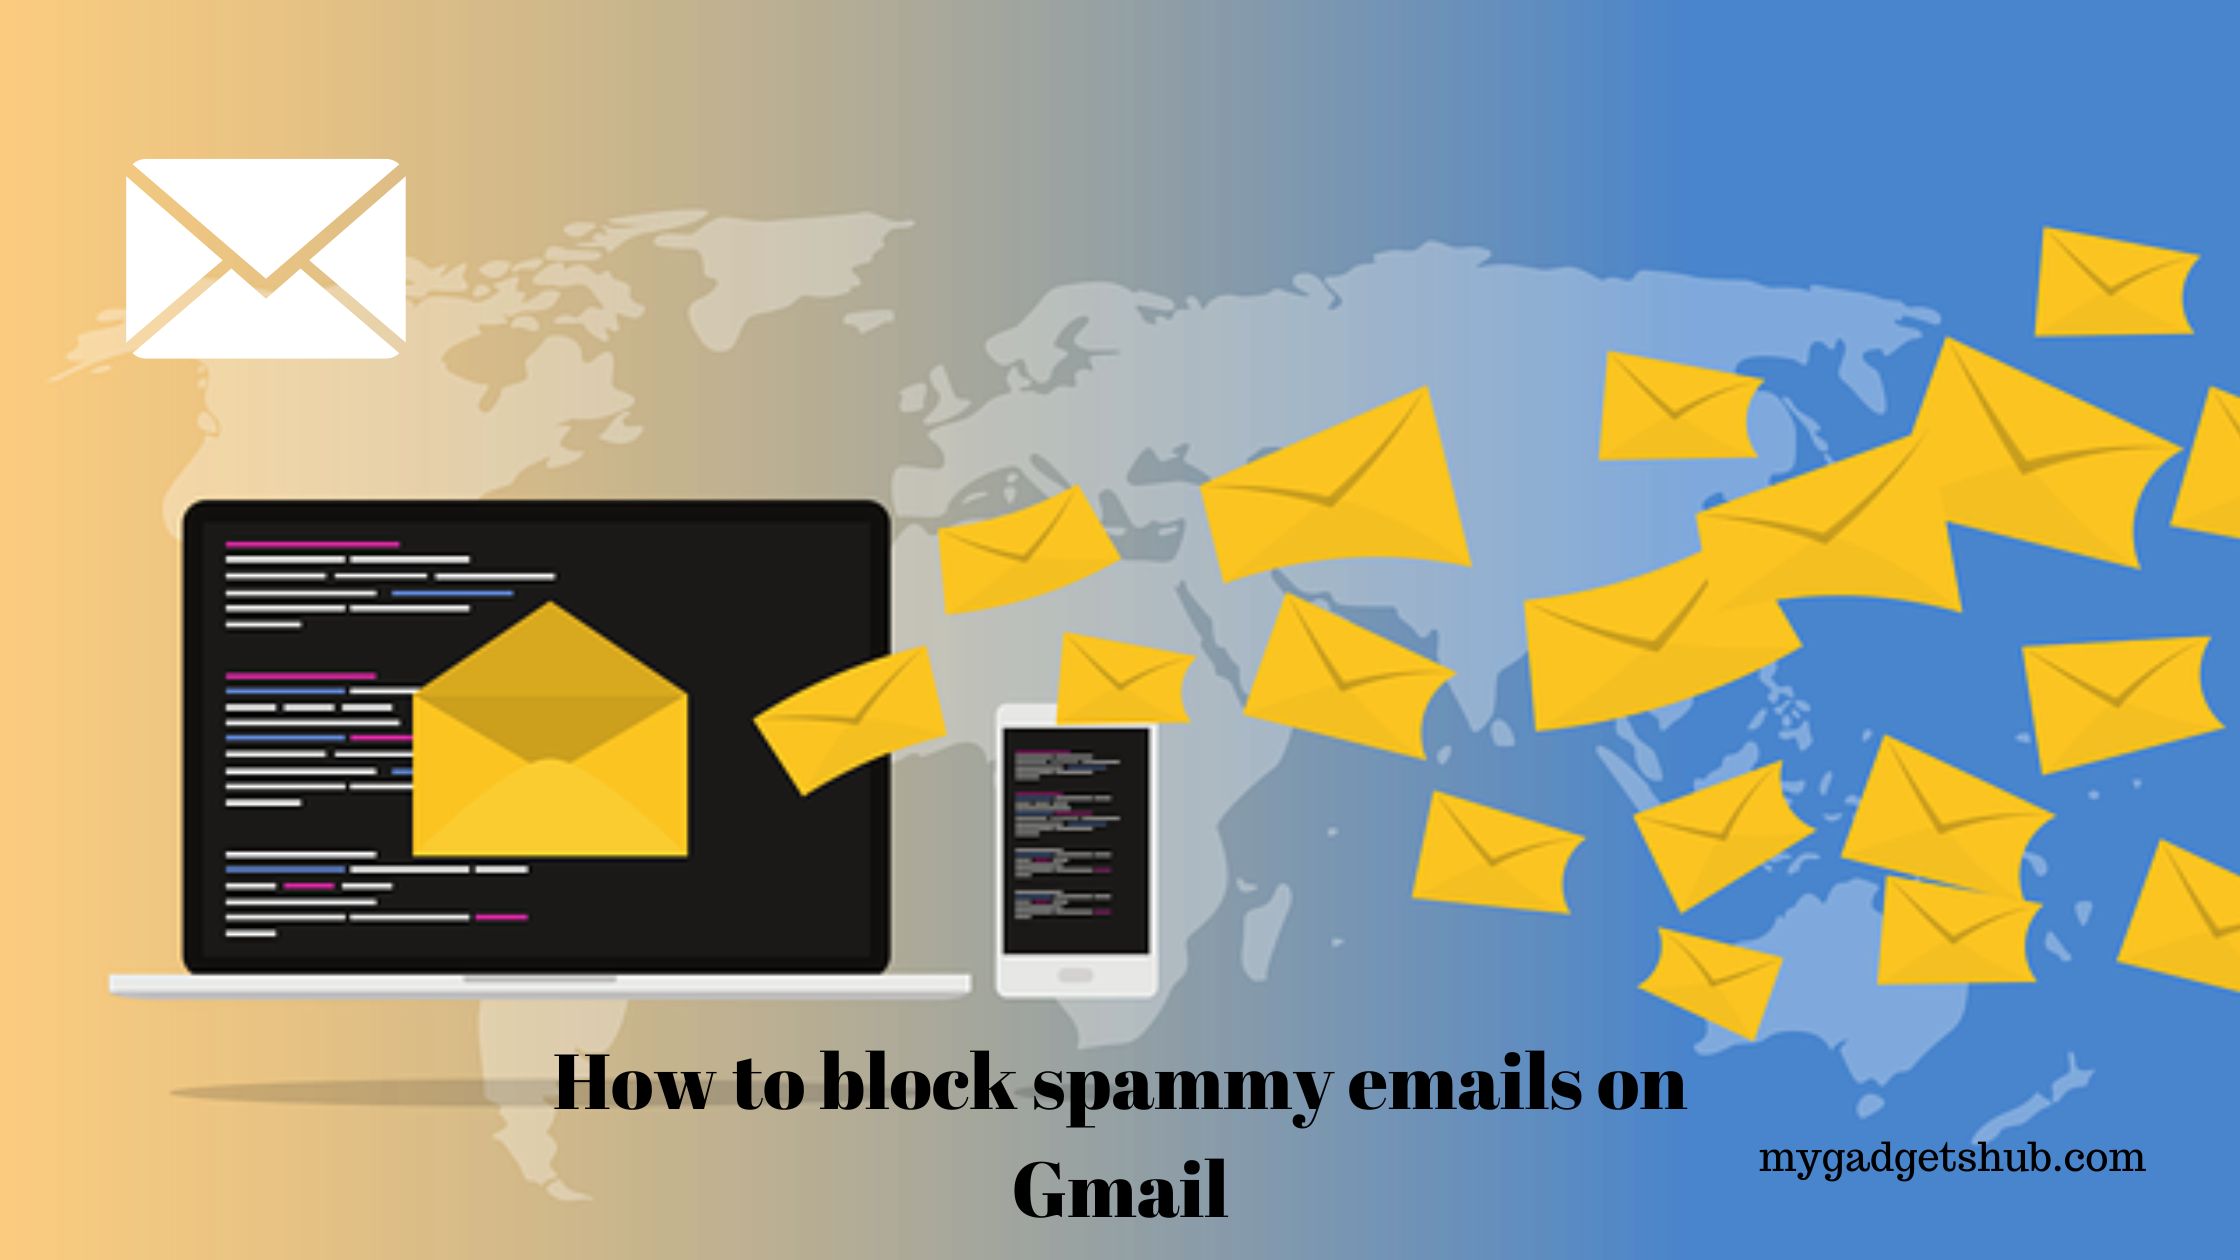 How to block spammy emails on Gmail